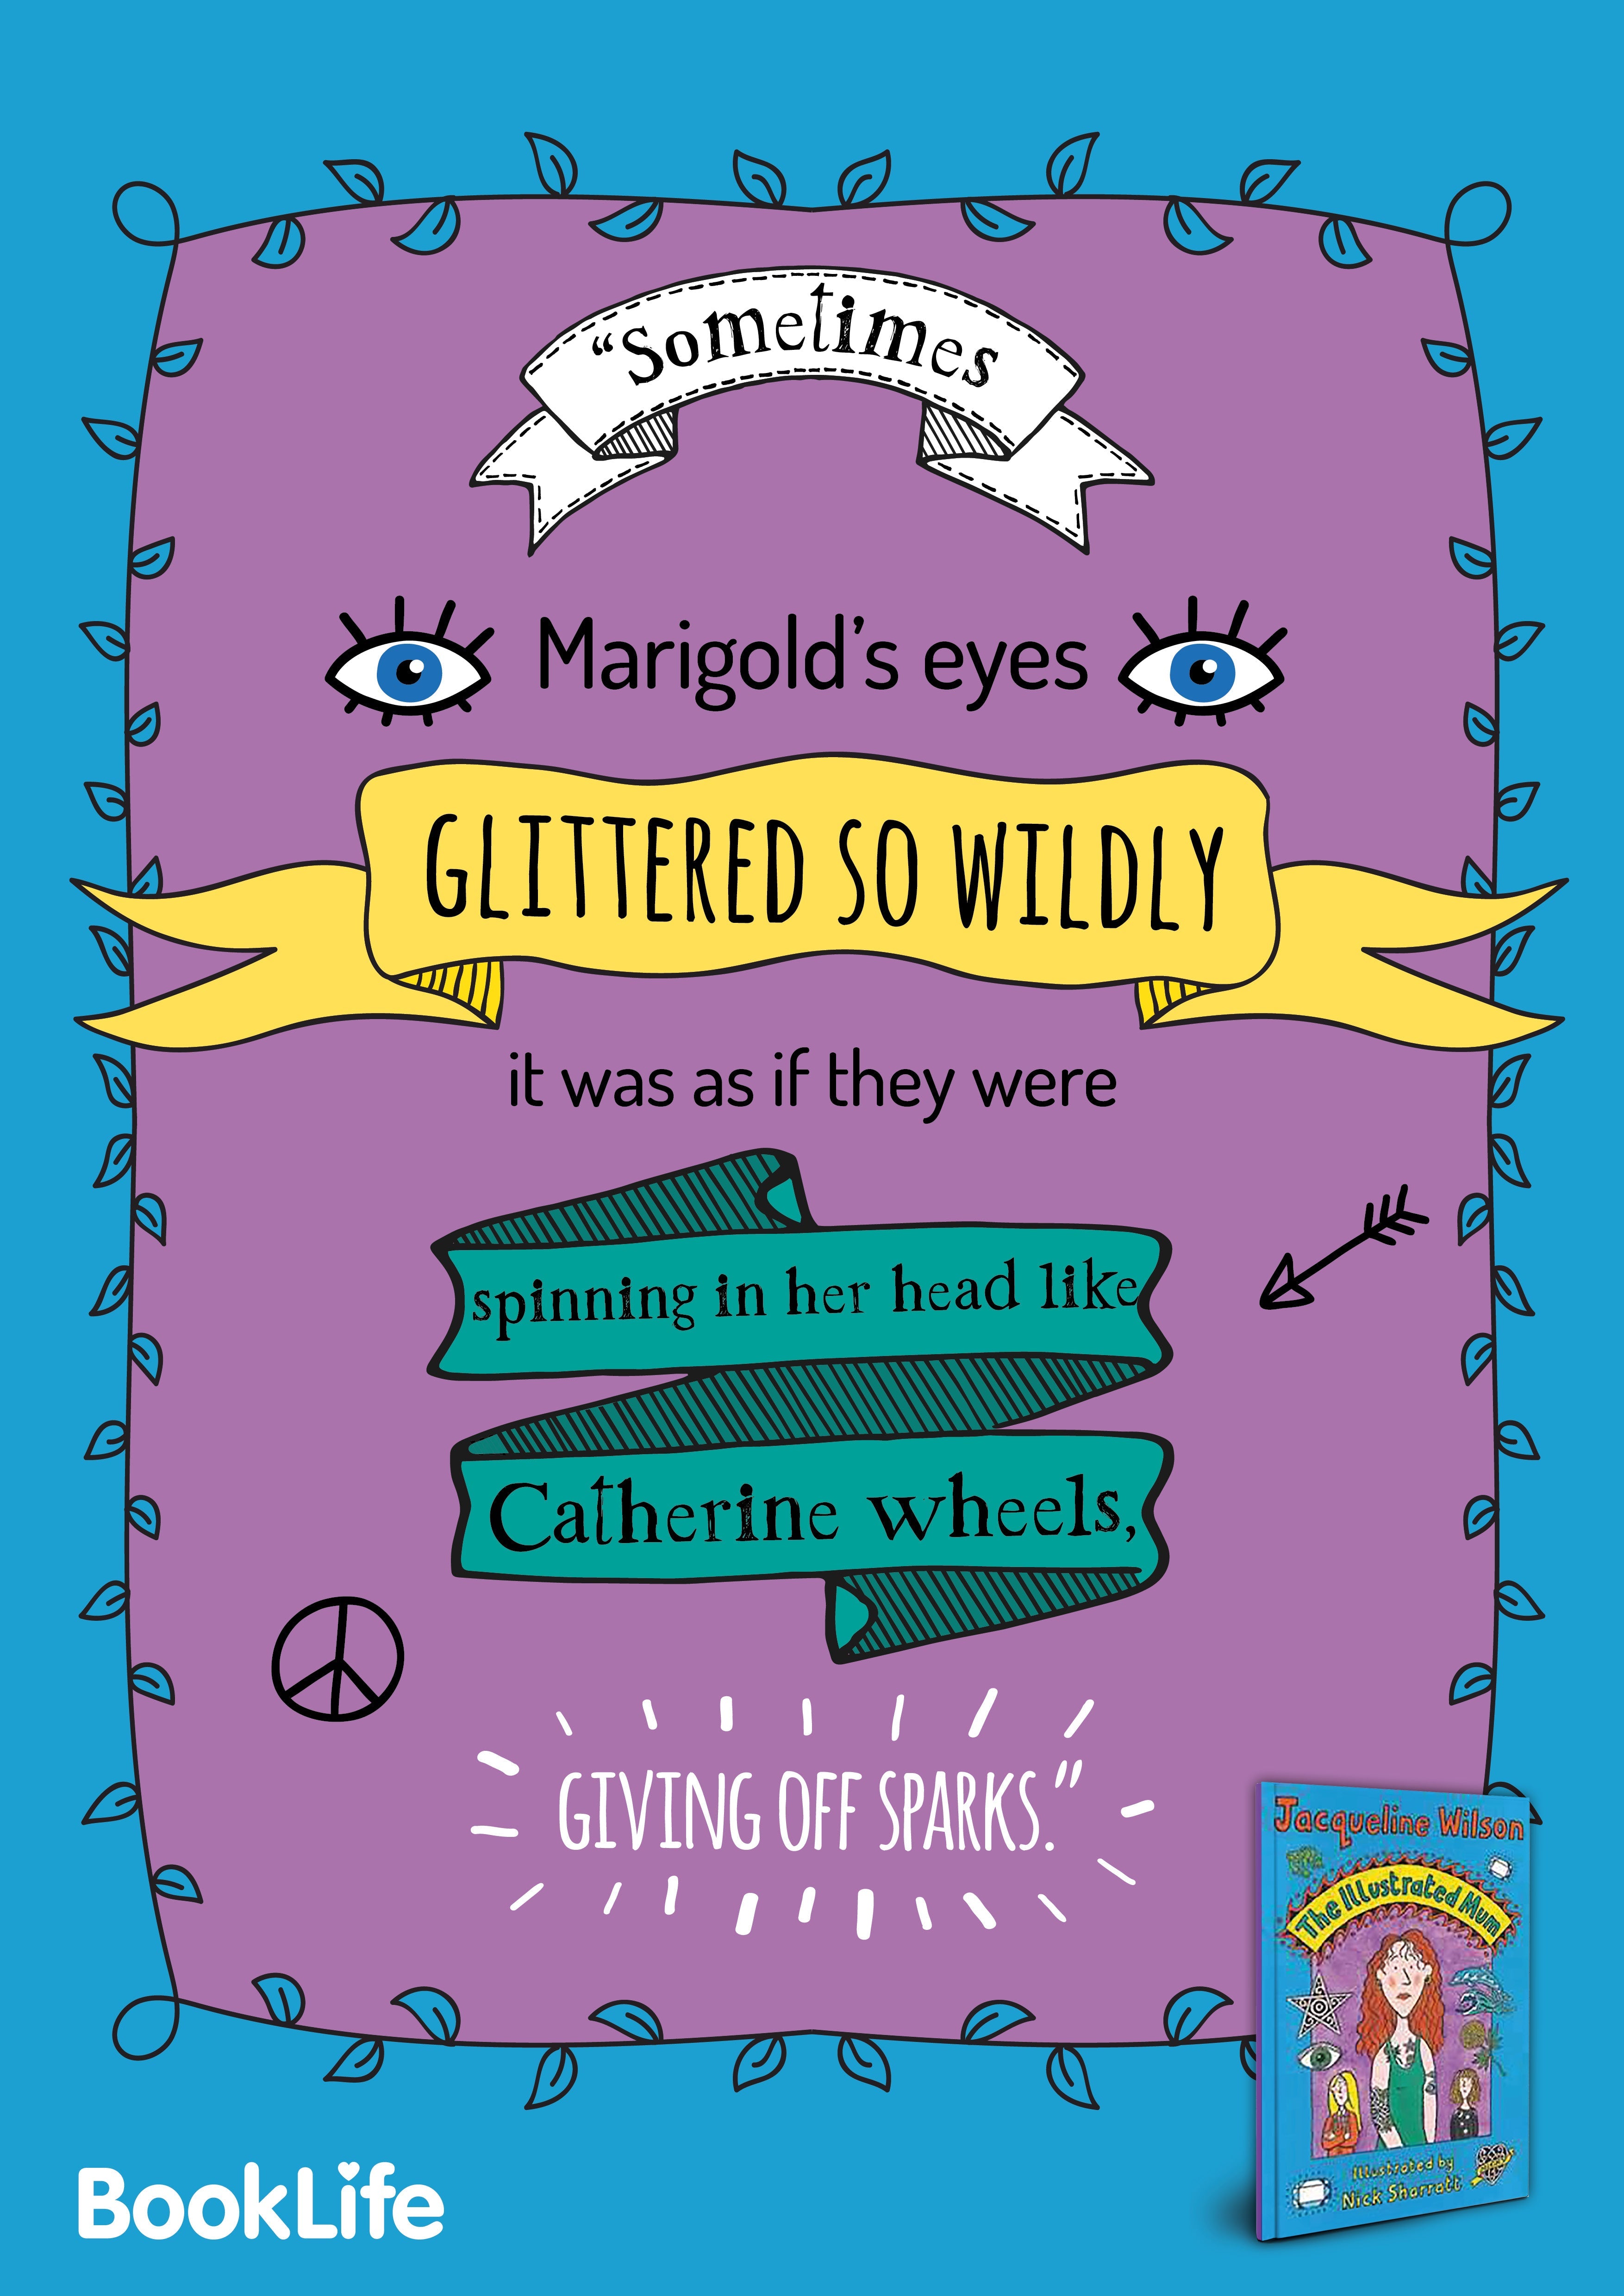 Free Jacqueline Wilson "Sometimes Marigold's Eyes Glittered..." Poster by BookLife